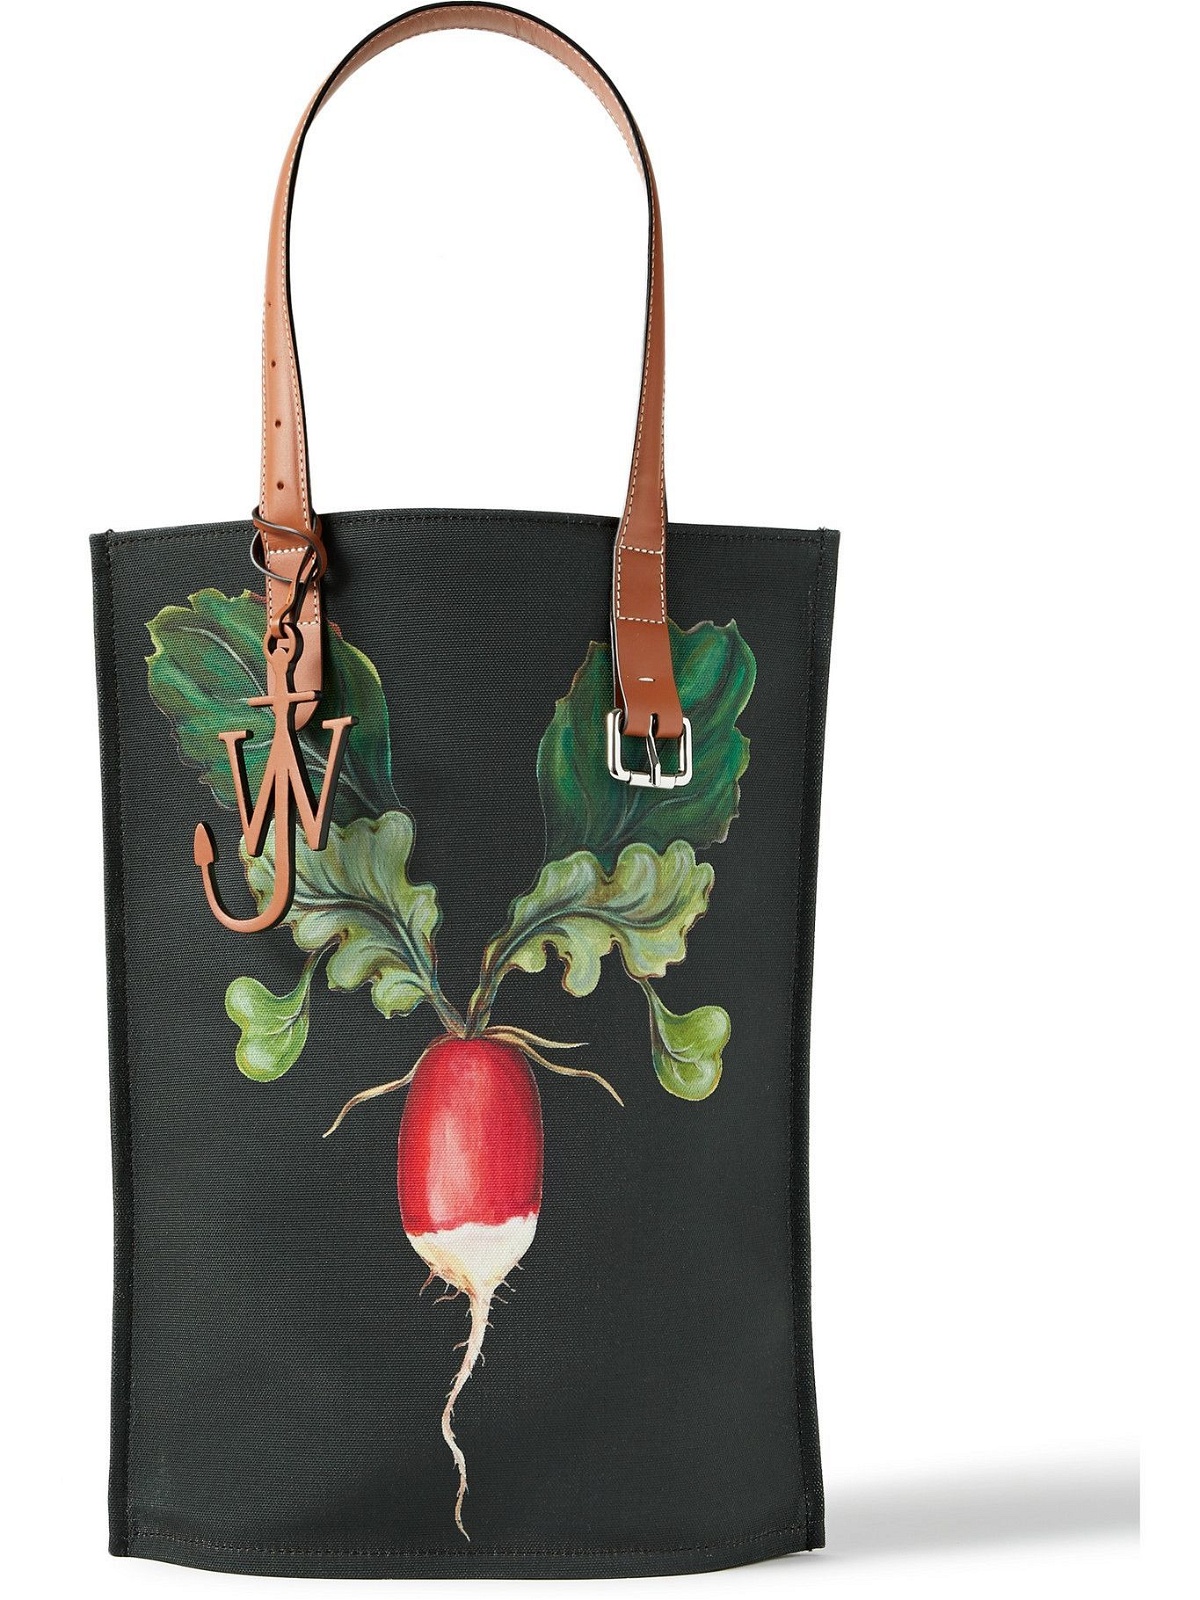 JW Anderson - Leather-Trimmed Printed Canvas Tote Bag JW Anderson